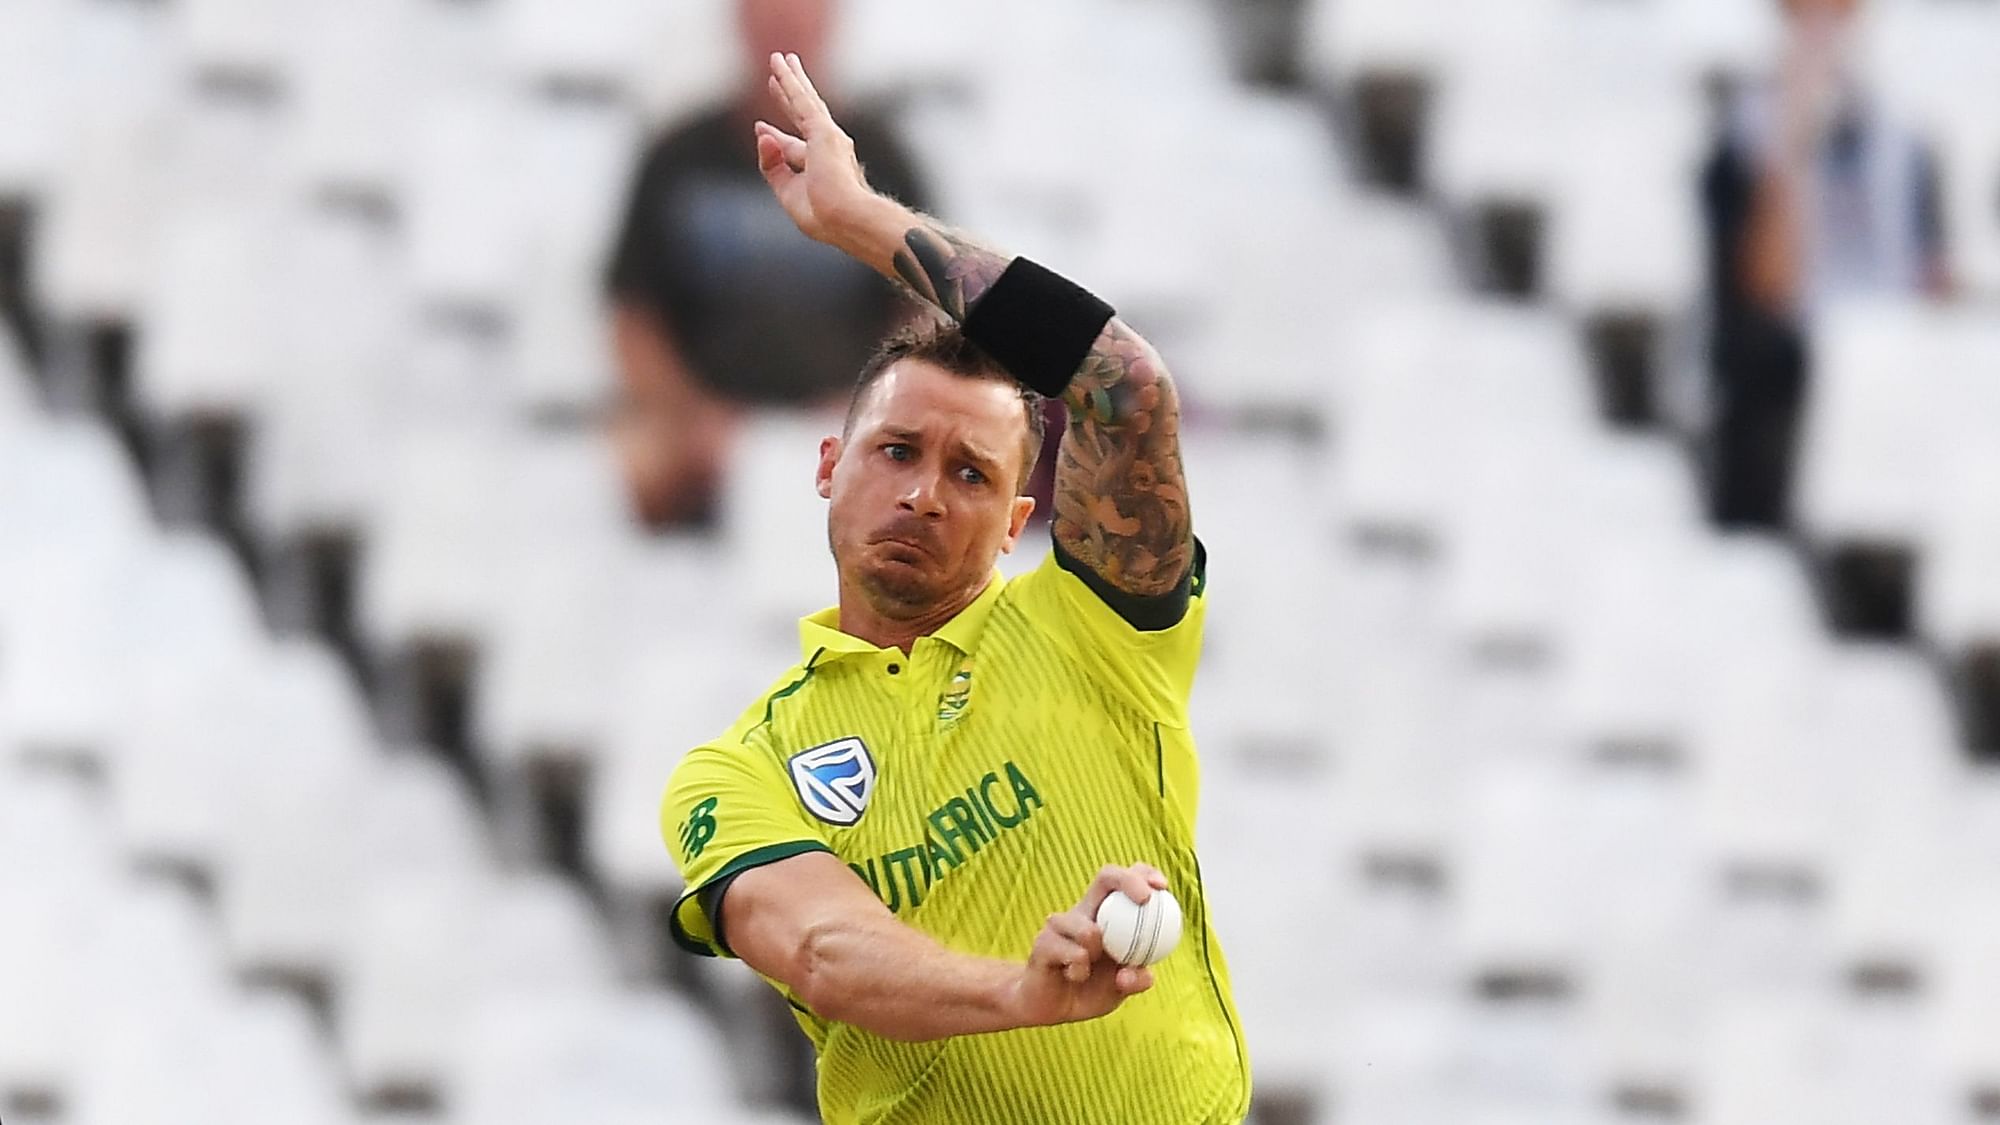 Dale Steyn is determined to be part of South Africa’s squad for the T20 World Cup in Australia.